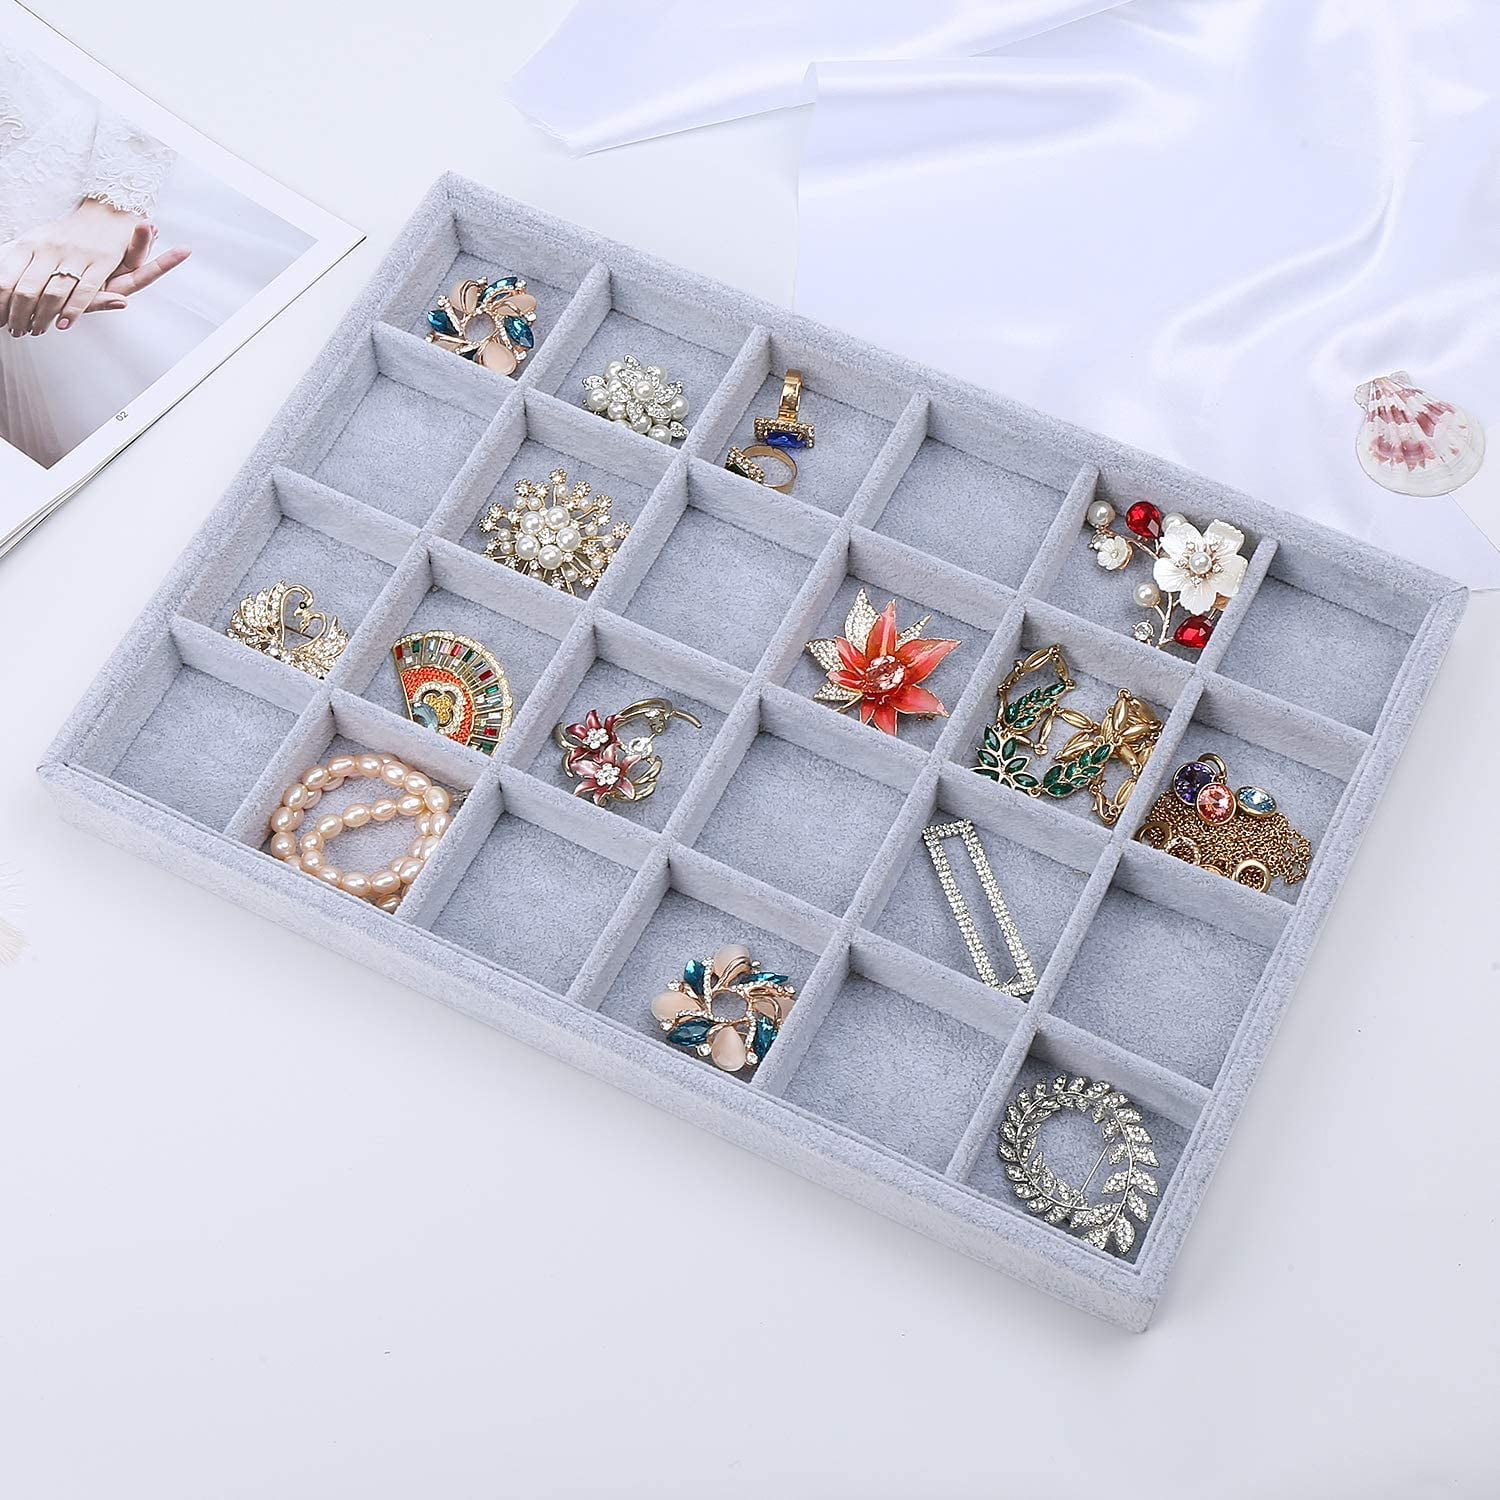 Details about   Small Size Fit Most Room Space Jewelry Storage Tray Ring Bracelet Gift Boxes